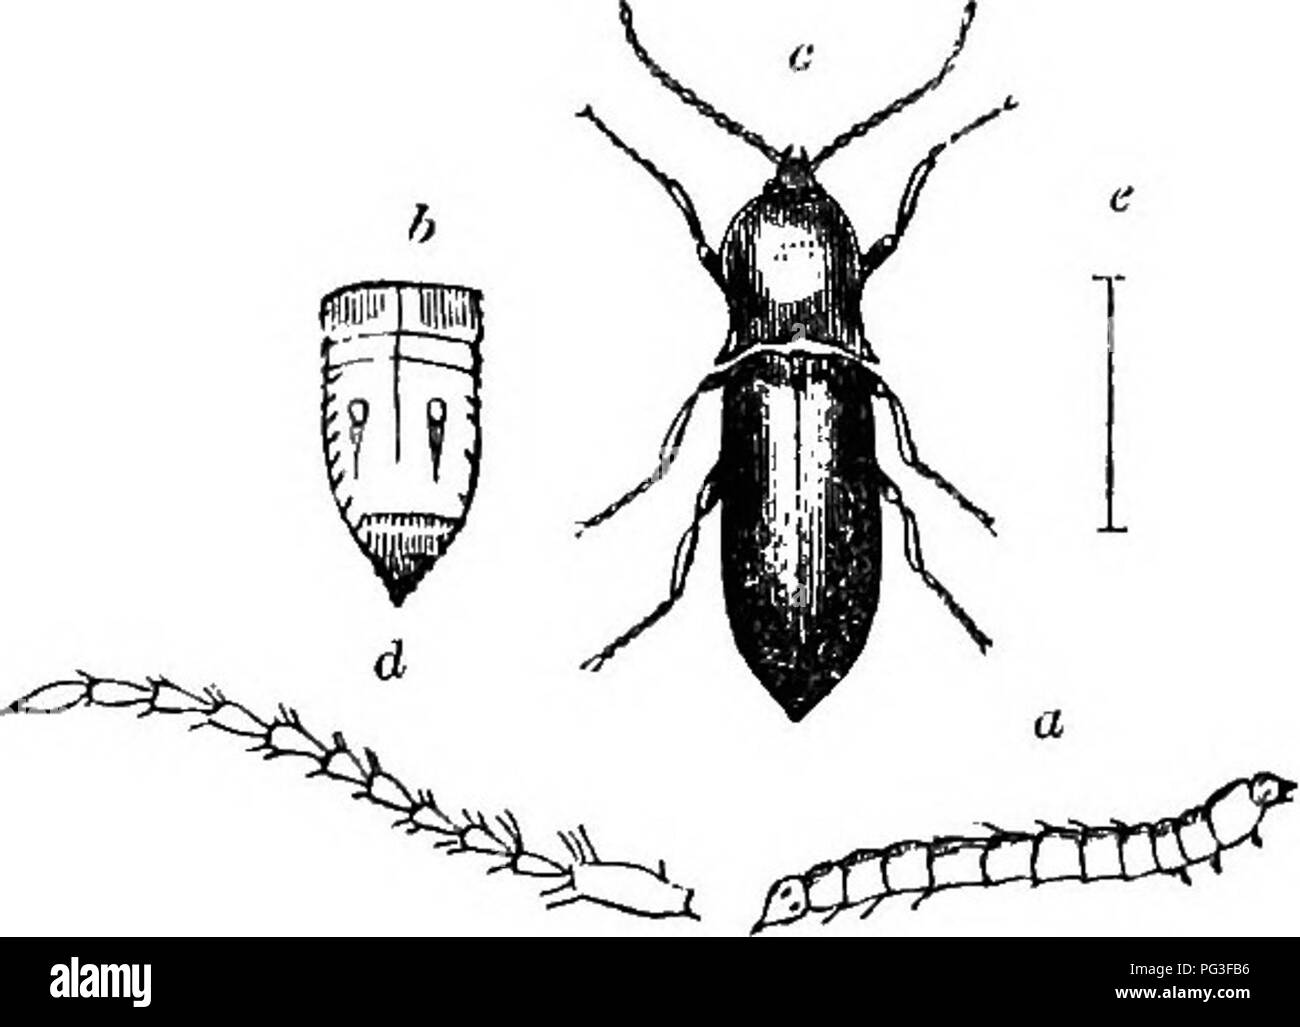 . The book of the garden. Gardening. YELLOW-BOOTED B£AN BEETLE.. O, WIRE-WORM; &amp;, CAUDAL JOINT MAGNIFIED ; C, PERFECT BEETLE ; d, ANTENNA. third of an inch in length, and is described by Stephens as being &quot; foscous, with a griseoua pubescence. Head and thorax blackish, the latter with the lateral branches nearly straight, and the posterior angles very acute; the disc very convex, and thickly punctate; scutellum fuscous; elytra broad, a little attenuated, round- ed at the apex, very convex; punctate striated; the striae disposed in pairs, and united at the apex, griseous yellow, with t Stock Photo